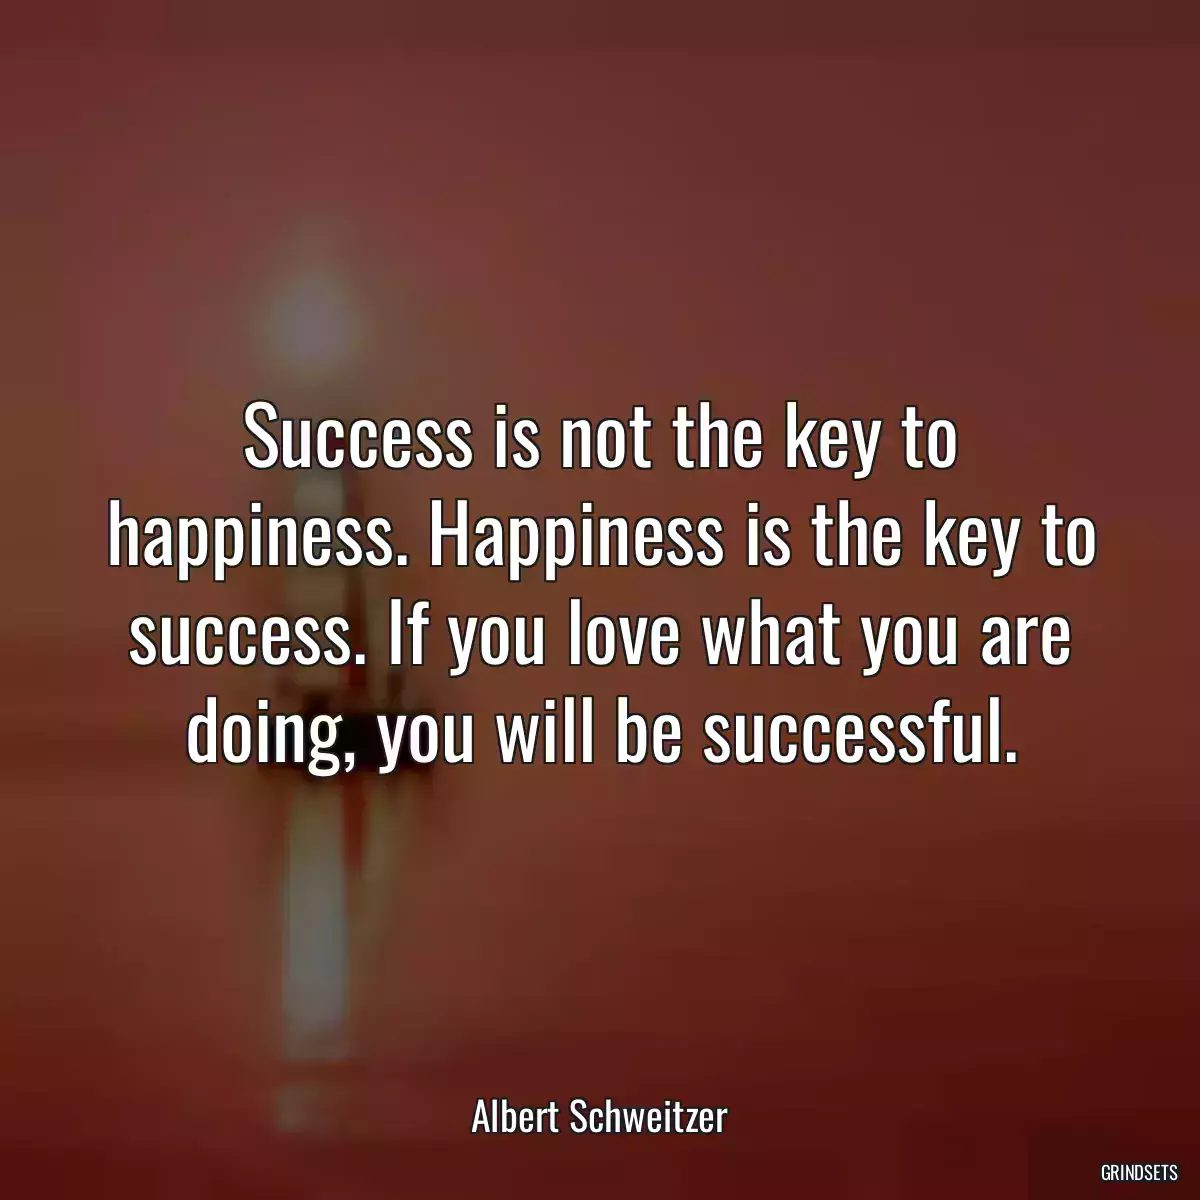 Success is not the key to happiness. Happiness is the key to success. If you love what you are doing, you will be successful.